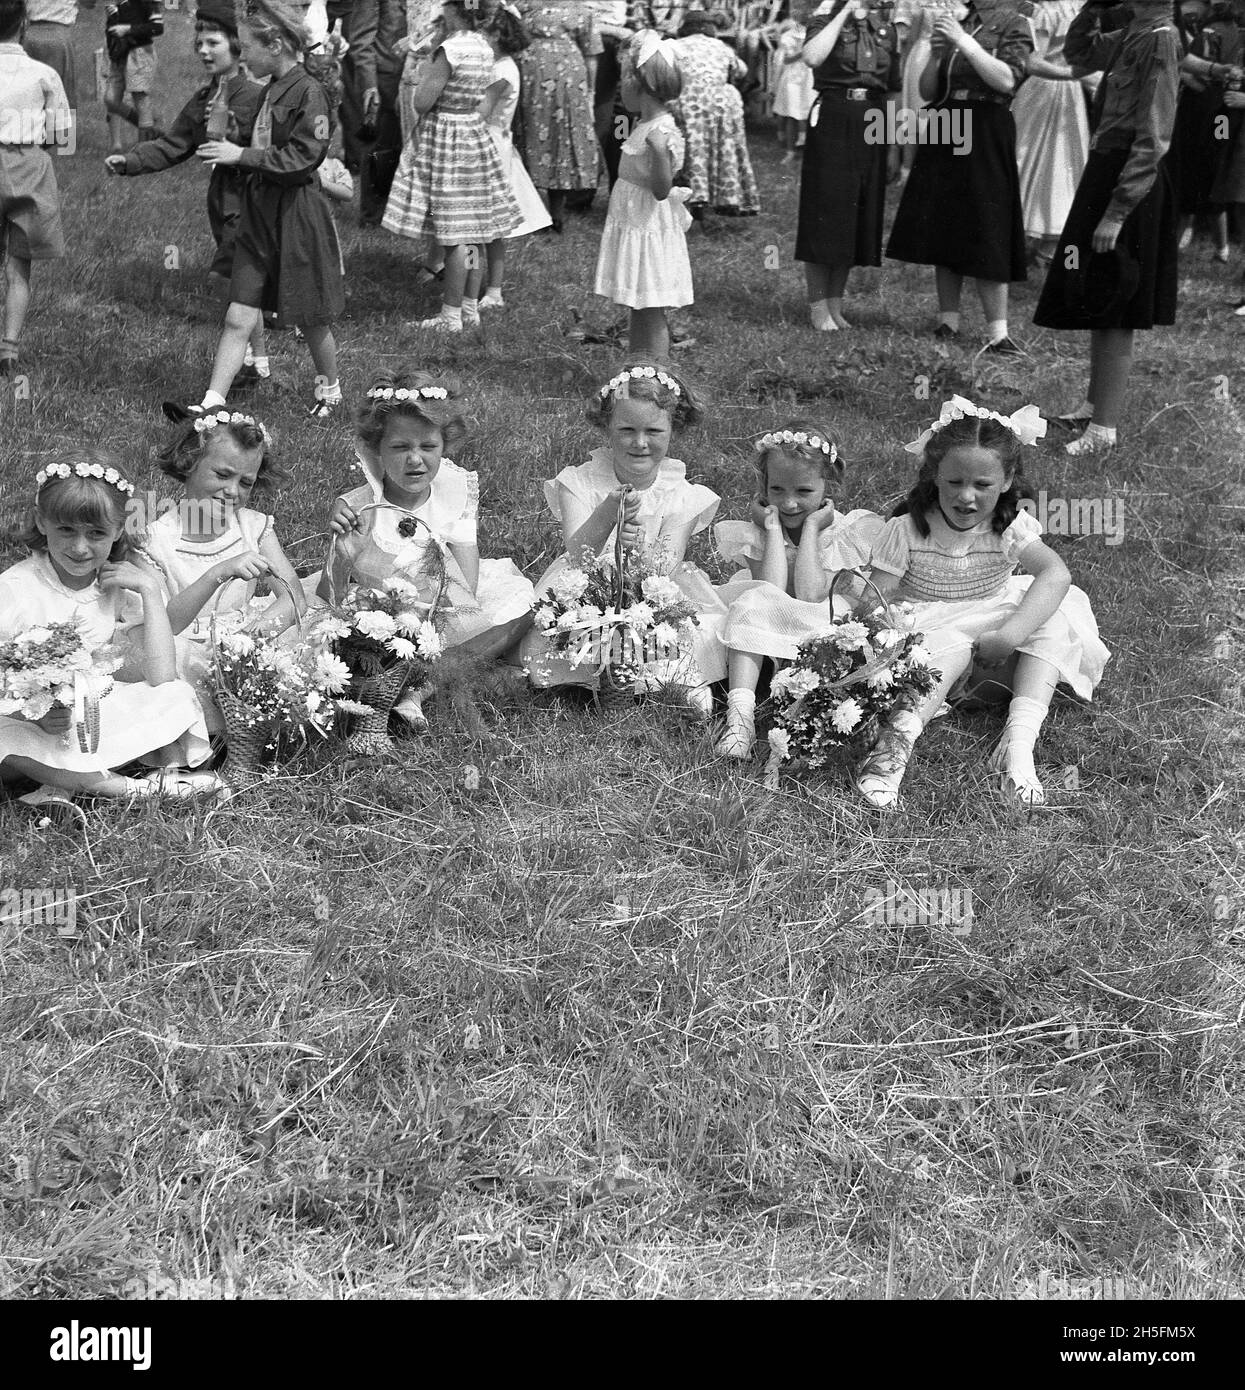 1950s, historical, young girls in their sunday school outfits and with flower bouquets, sitting down on the grass at a local park, having taken part in a street procession with their families for the Audley Range Congregational Church, Audley Range, Blackburn, Lancashire, England, UK. From the 1840s, the industrial revolution and the growth of the cotton and textile industries had transformed the area and terraced housing, schools, shops, pubs and churches were built on farm land to service the new population working in the factories and textile mills. Stock Photo